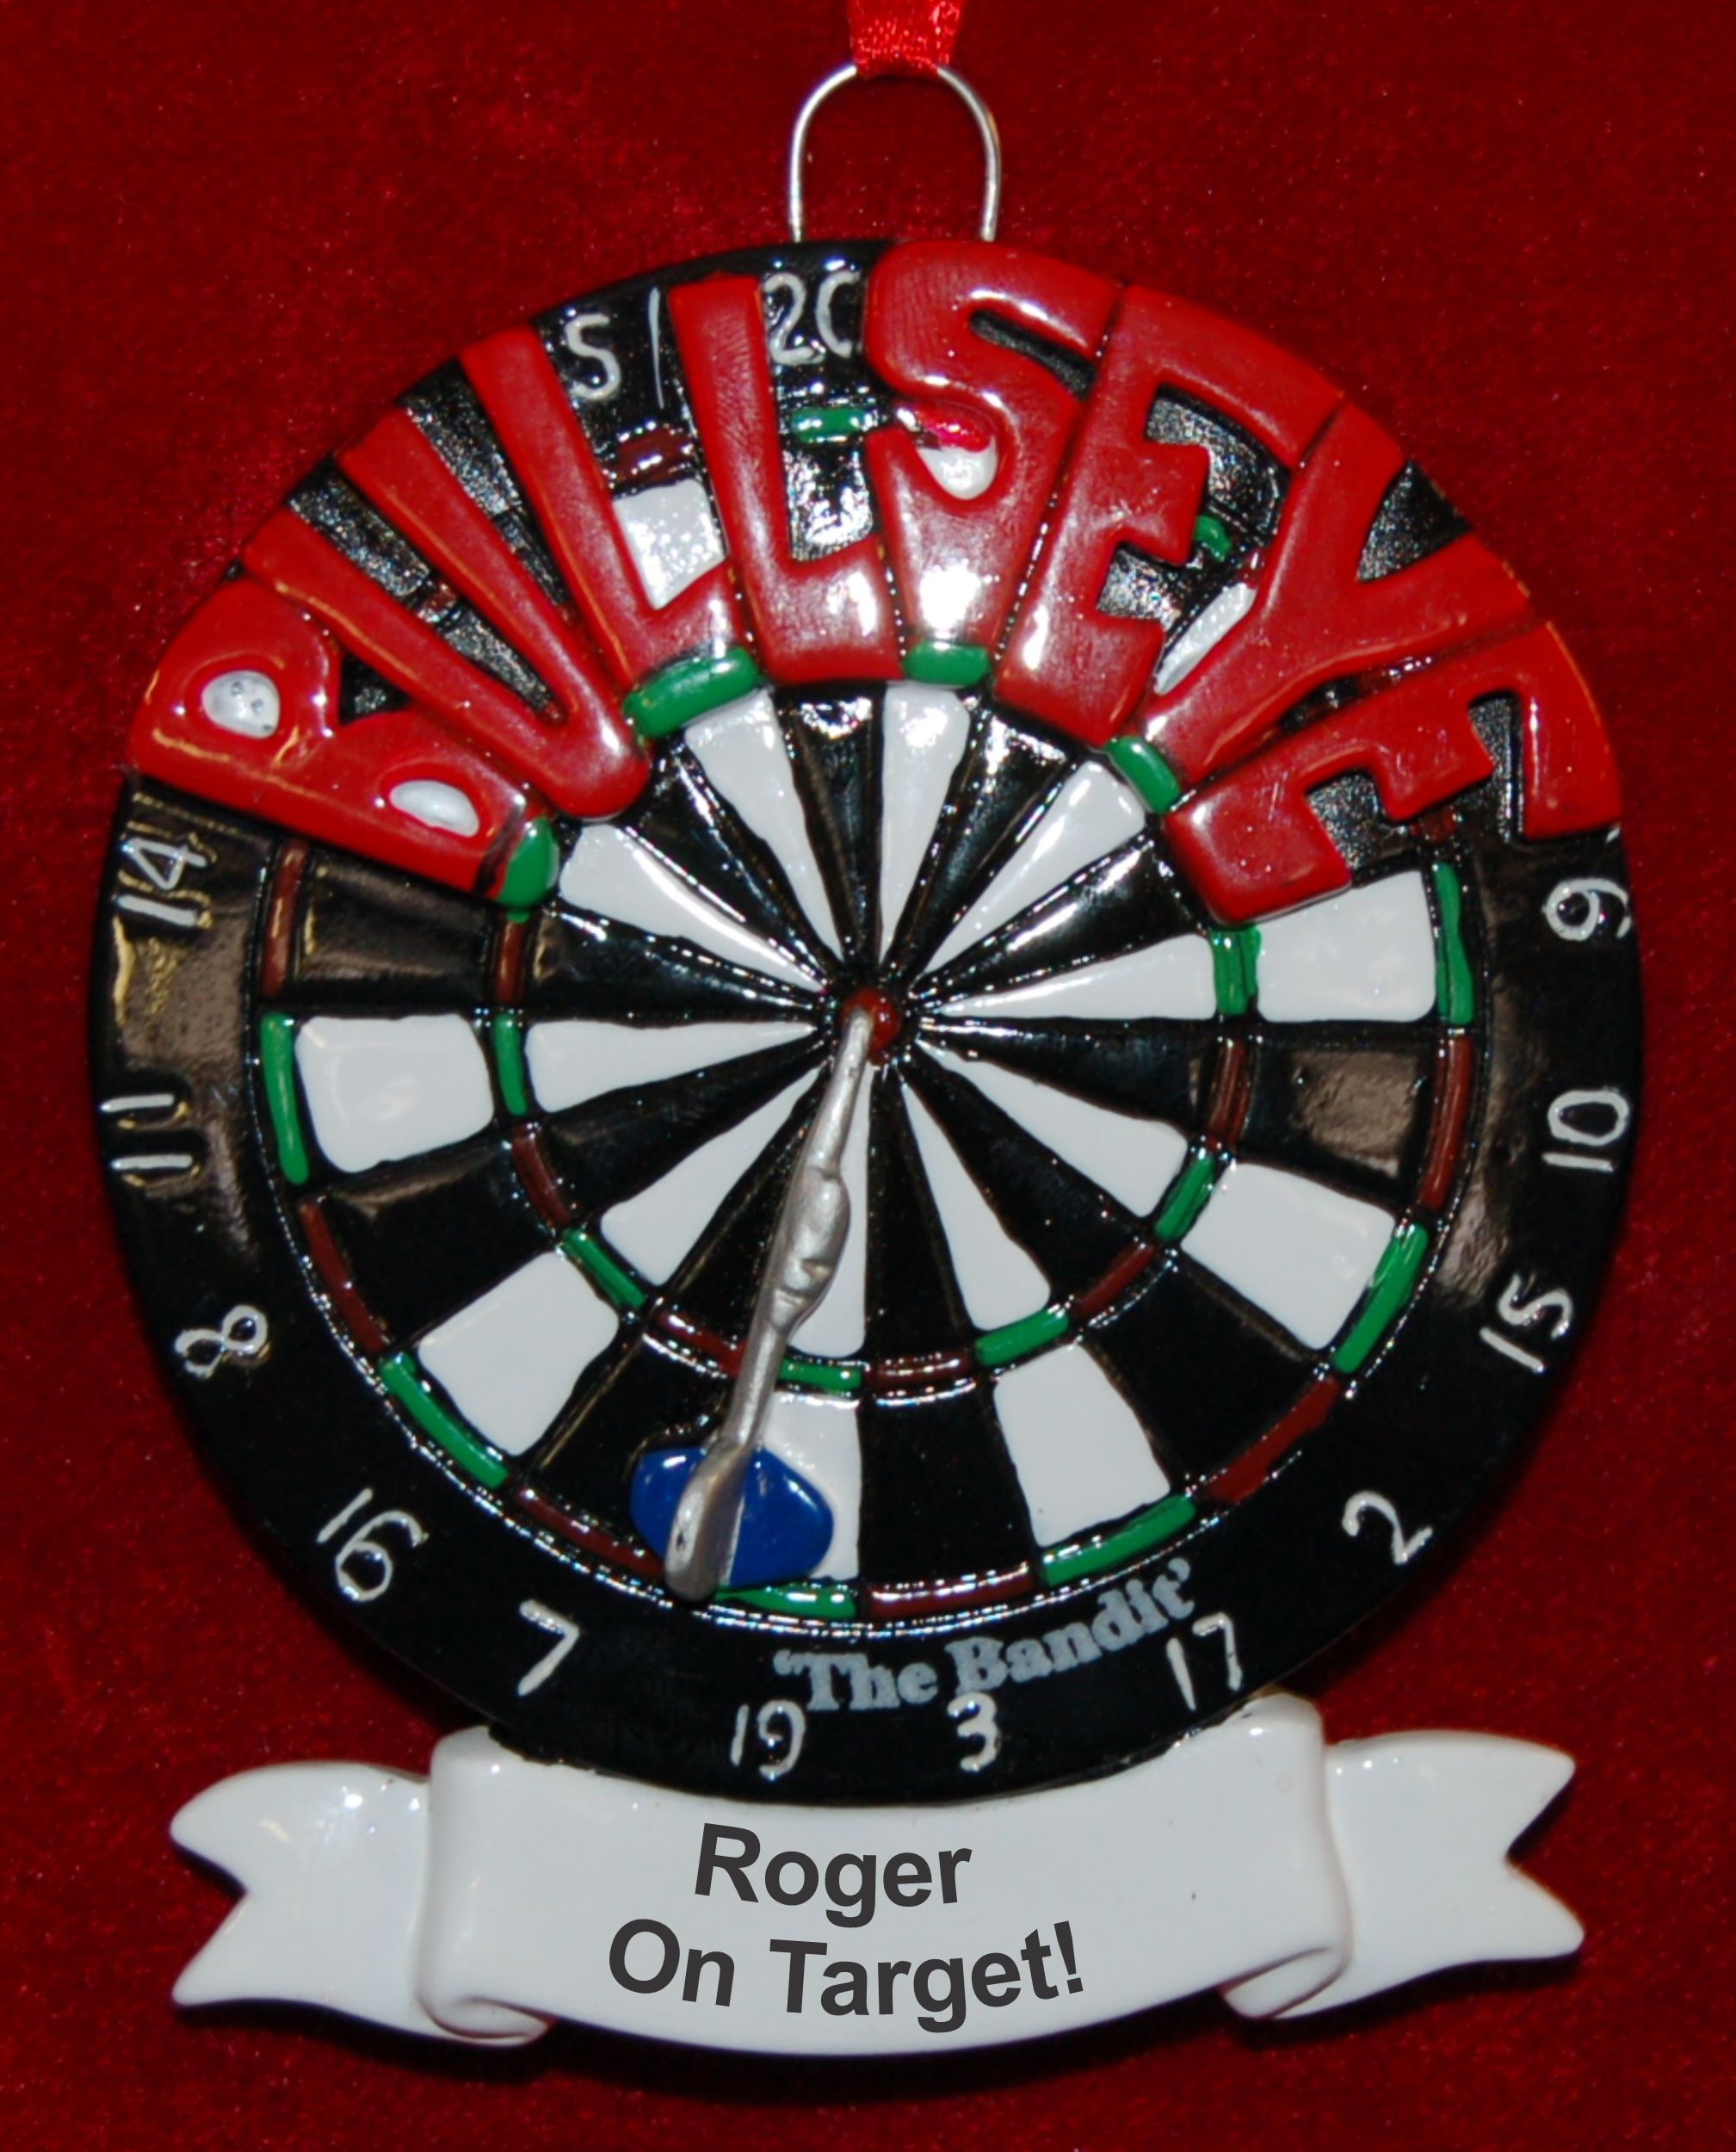 Darts Christmas Ornament On Target Personalized by RussellRhodes.com